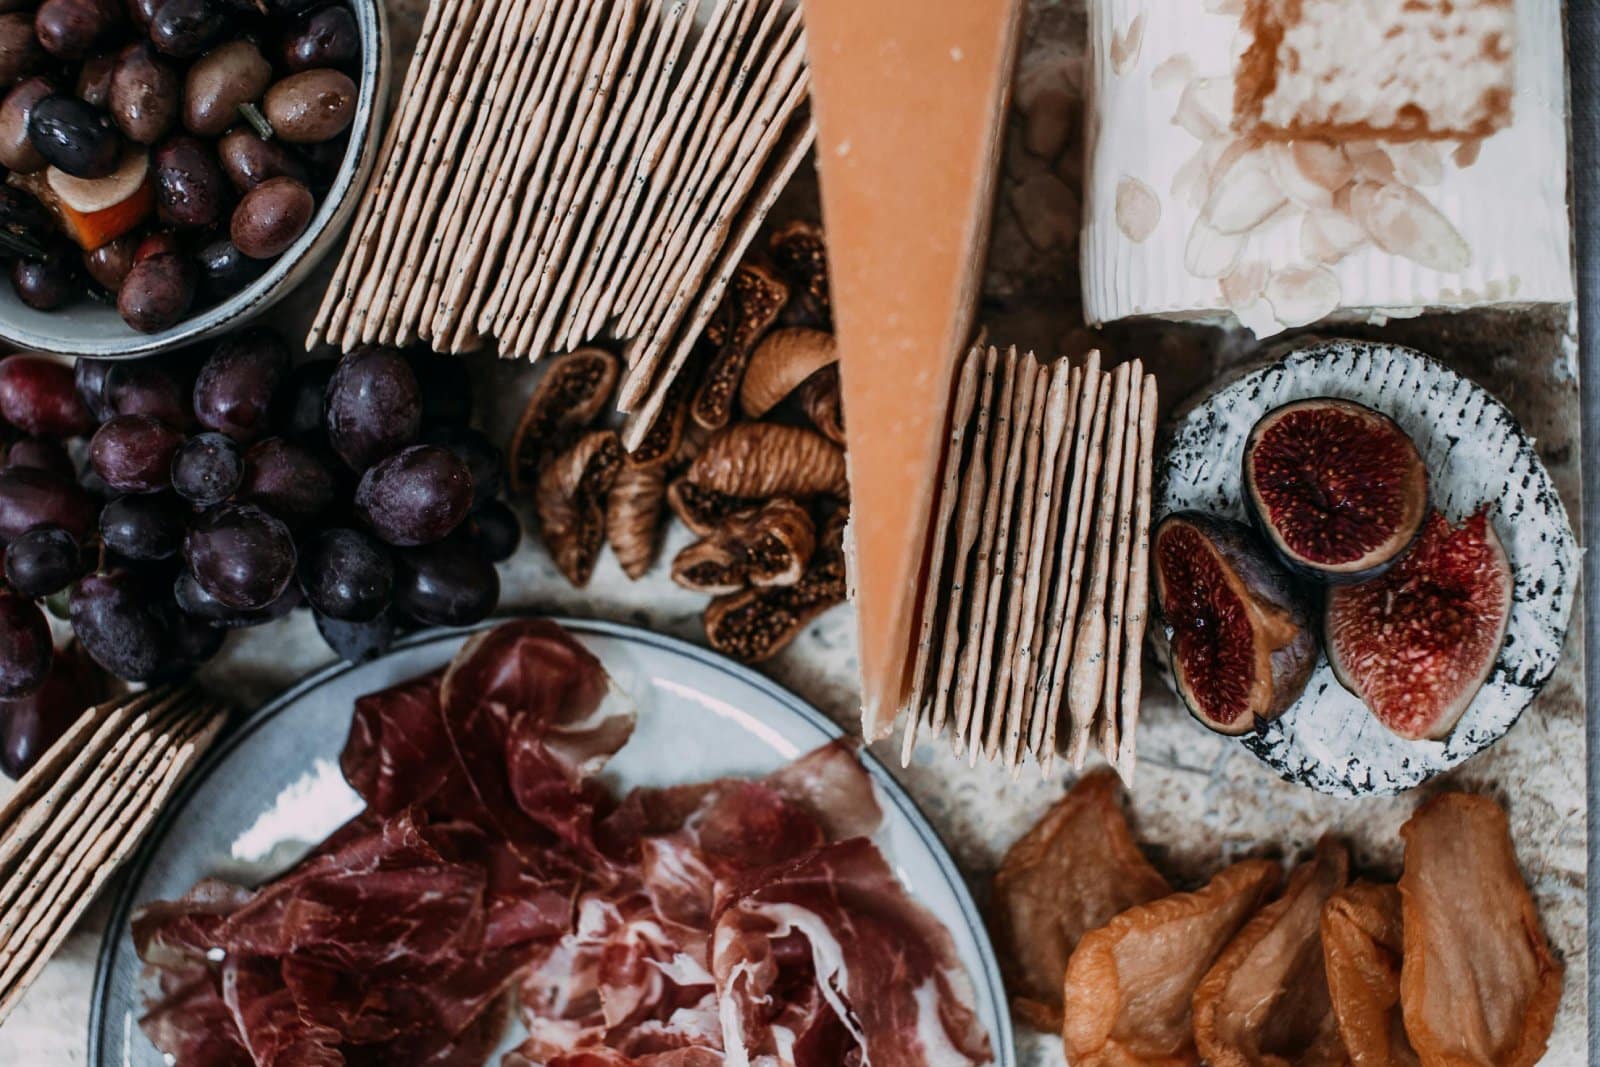 Image Credit: Pexels / Rachel Claire <p><span>Embark on a culinary pilgrimage through the scenic landscapes of Navarre, a region in northern Spain renowned for its fertile farmland, historic towns, and vibrant gastronomy. Sample Navarre’s tapas specialties like pintxos, txistorra, and piperrada while soaking in the rich cultural heritage and timeless traditions of this enchanting region.</span></p>